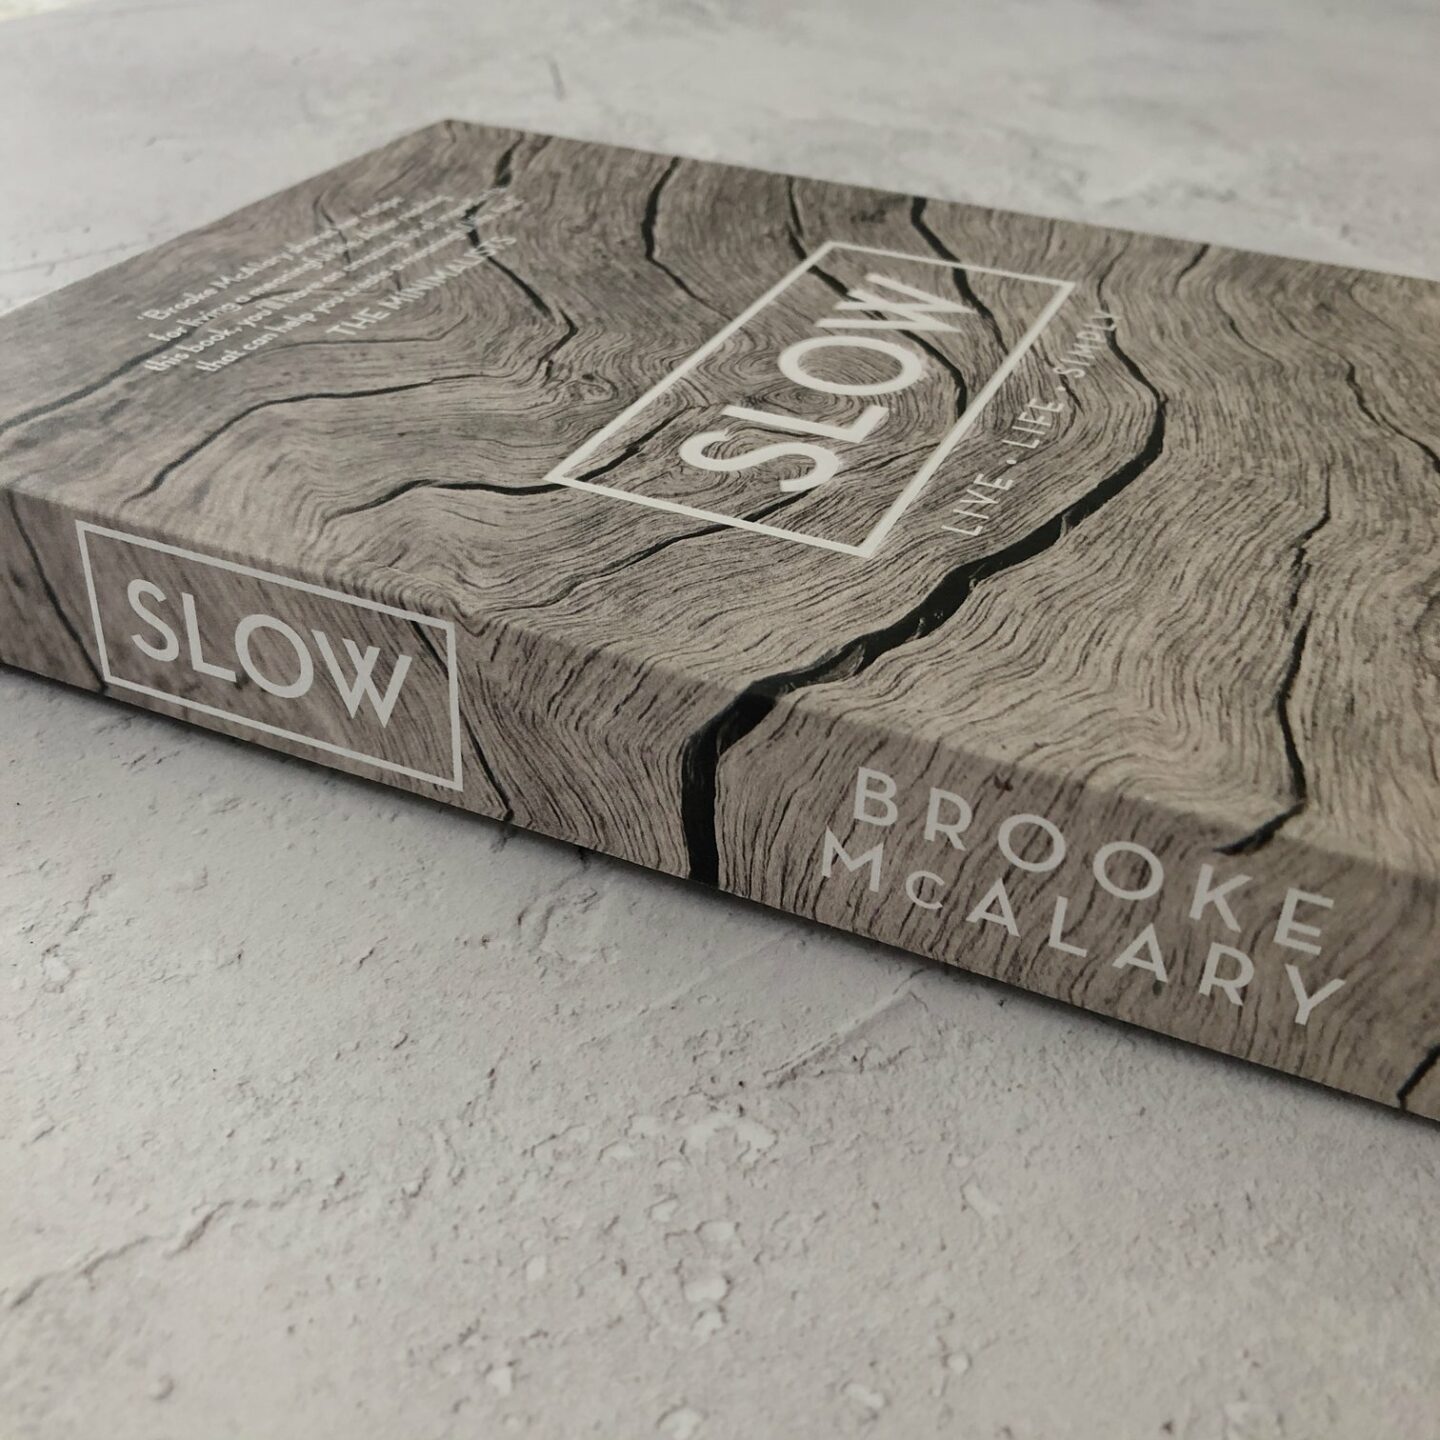 Slow book by Brooke McAlary on grey background